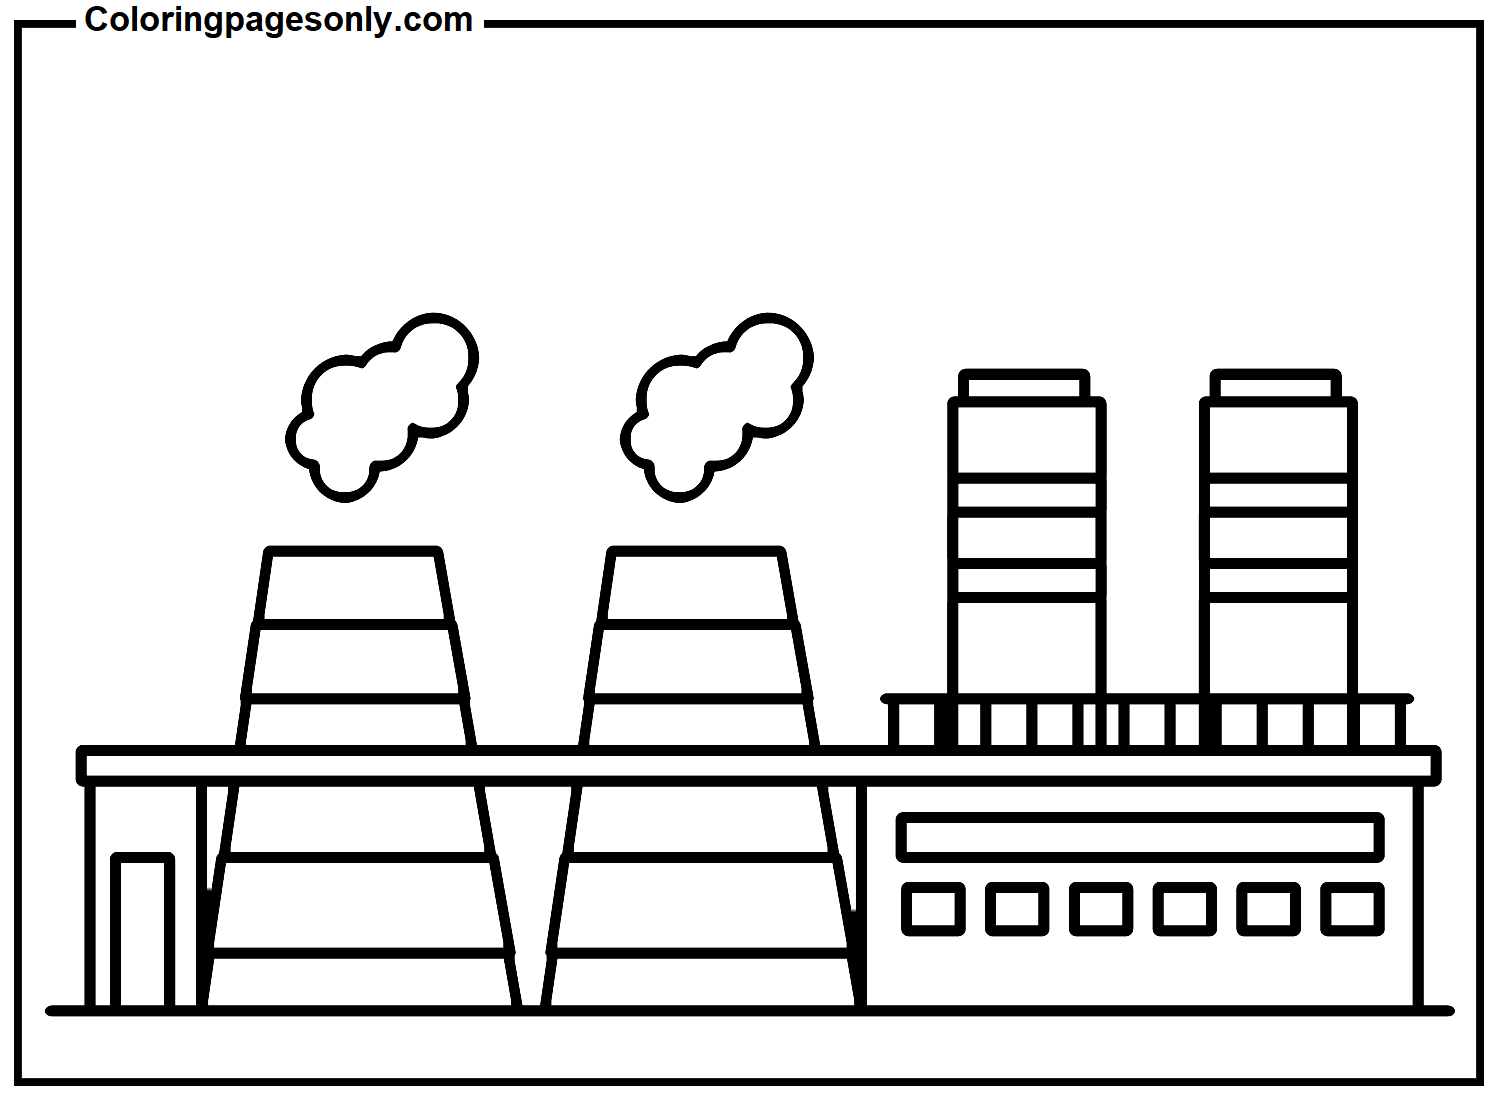 Factory Pictures Free Coloring Page - Free Printable Coloring Pages